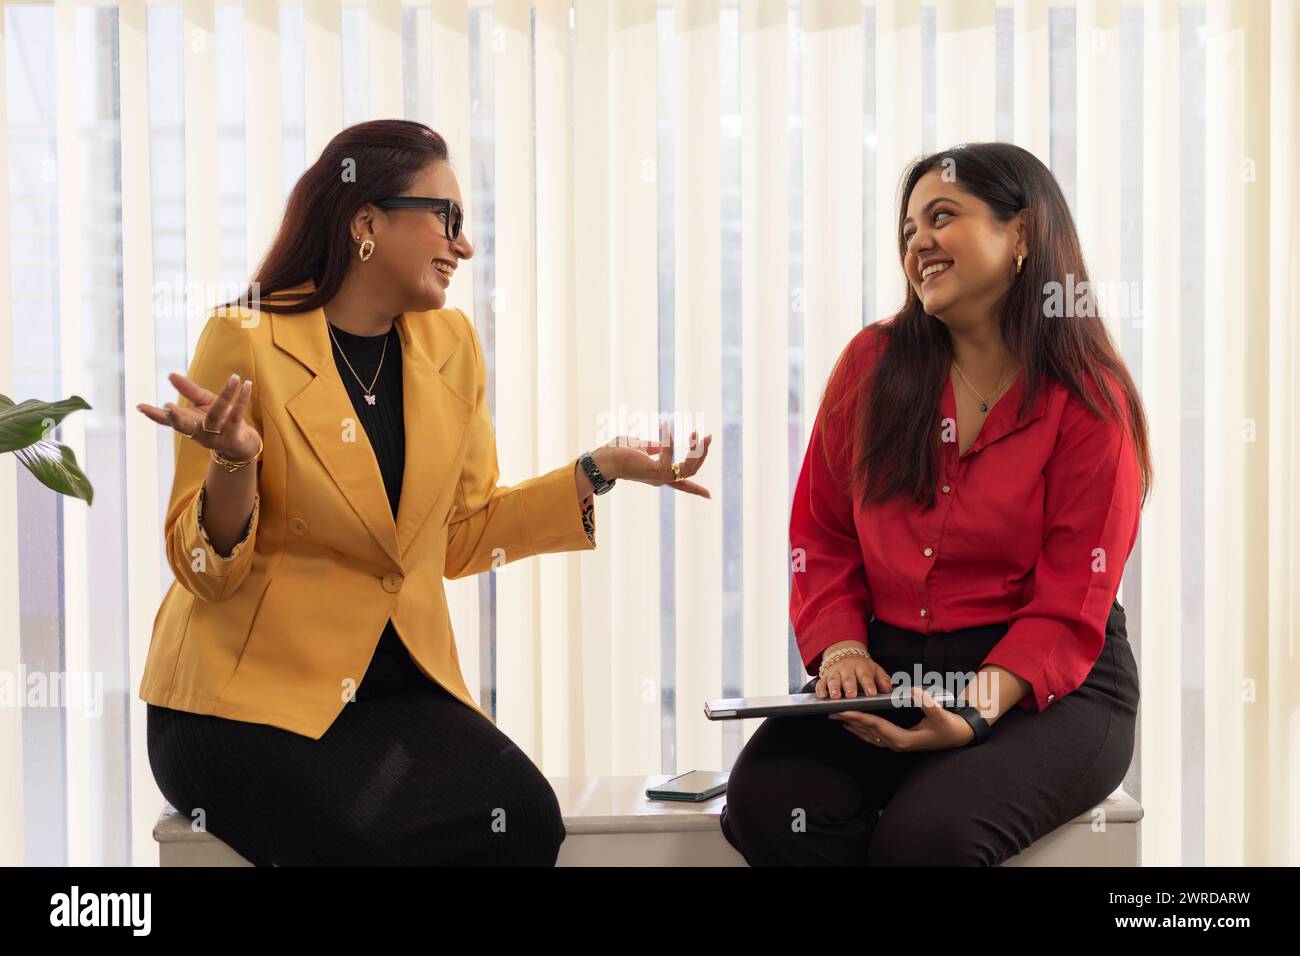 Portrait of two businesswoman sitting on a bench and having a casual discussion in office Stock Photo